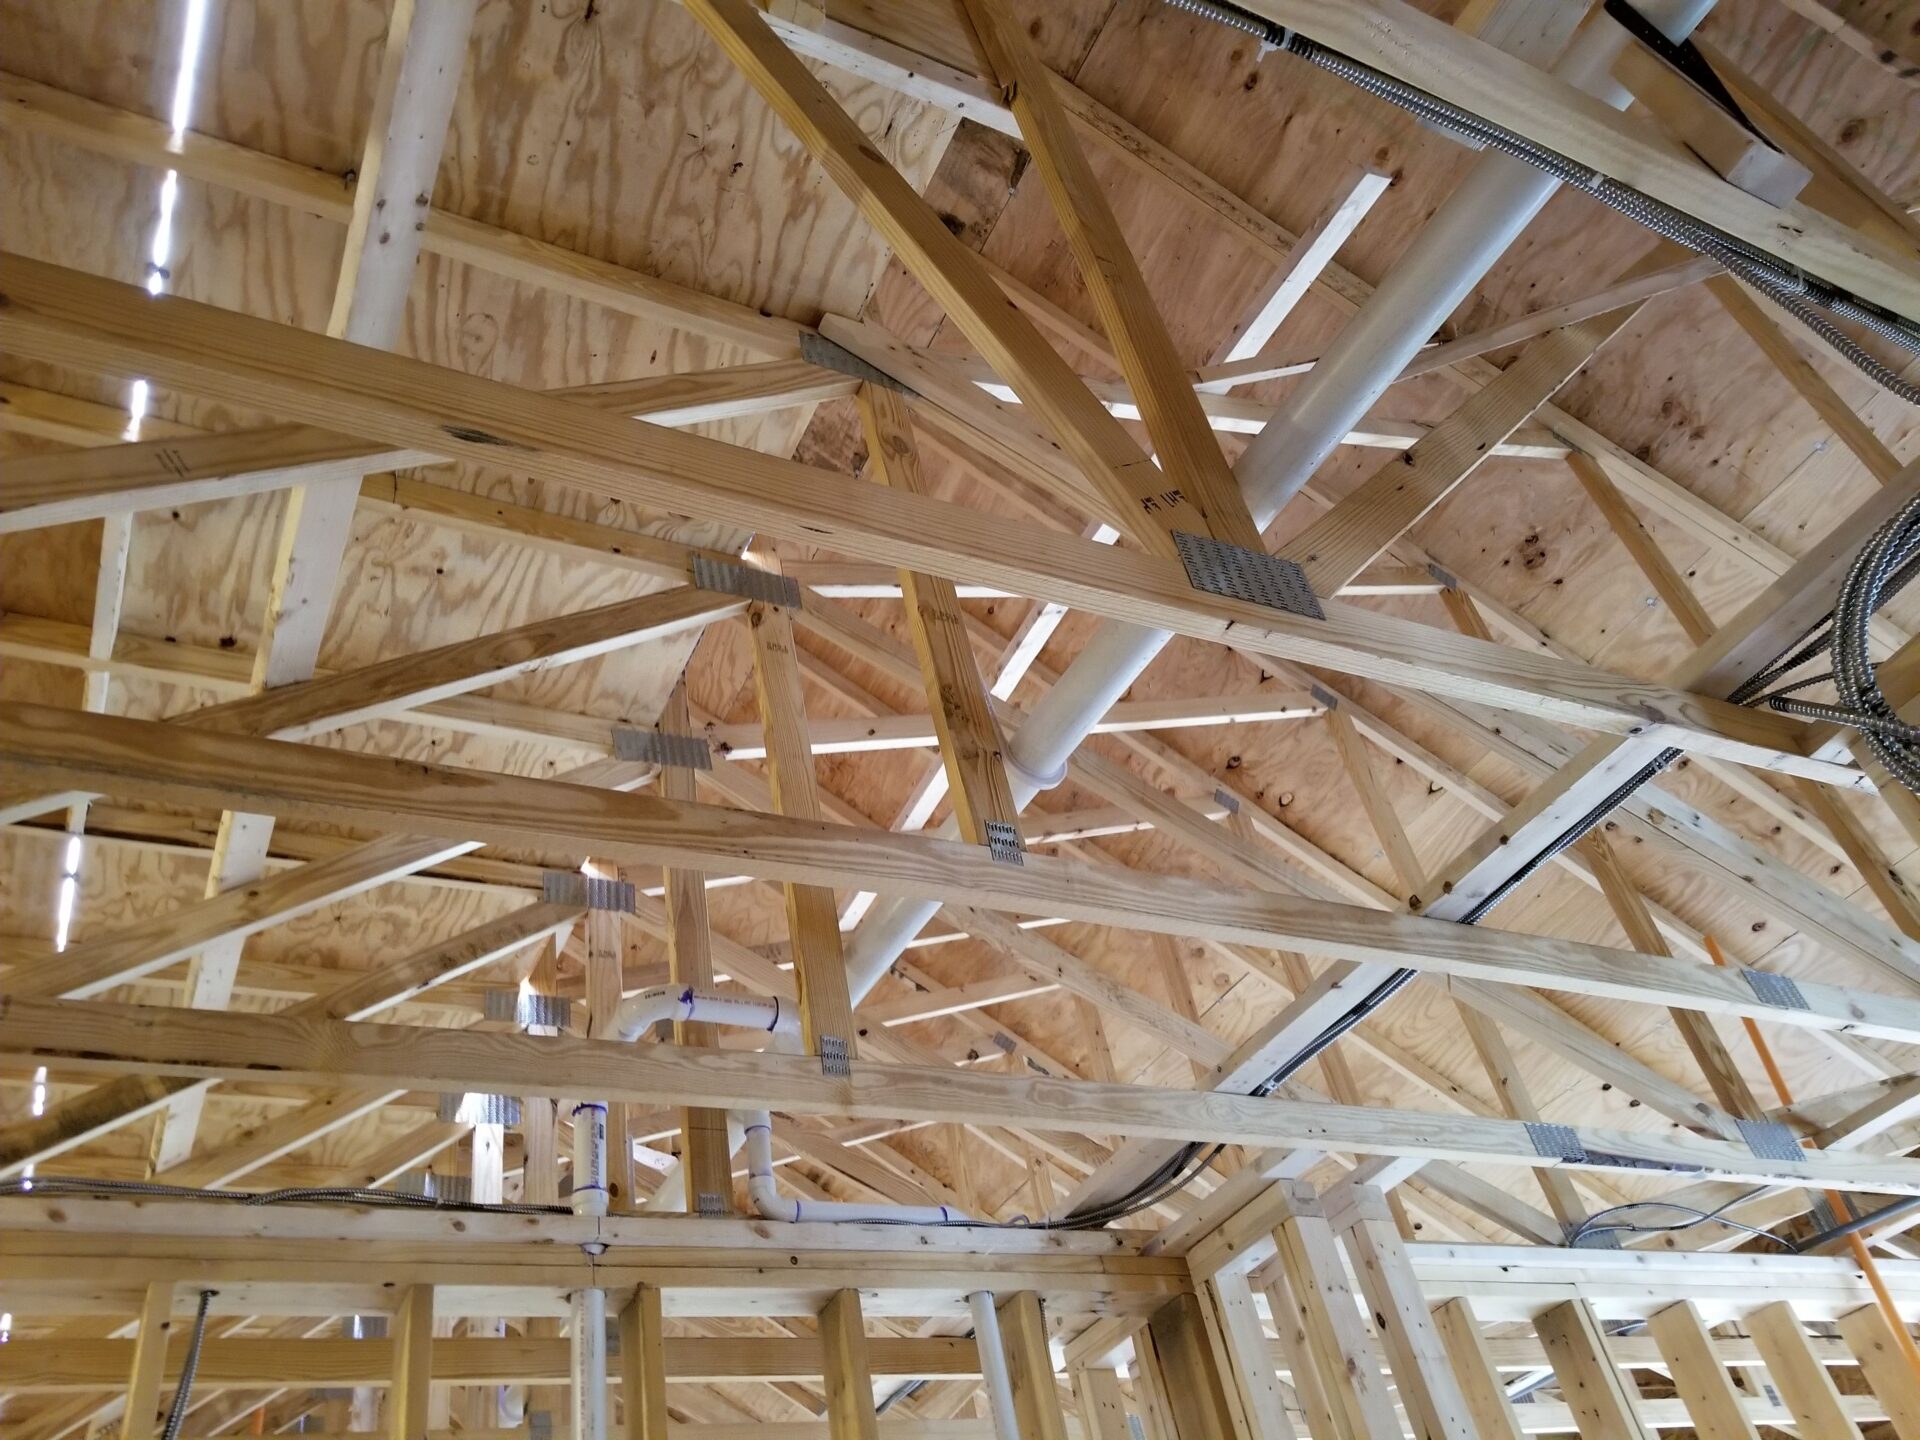 Building roof of a workshop with pipes